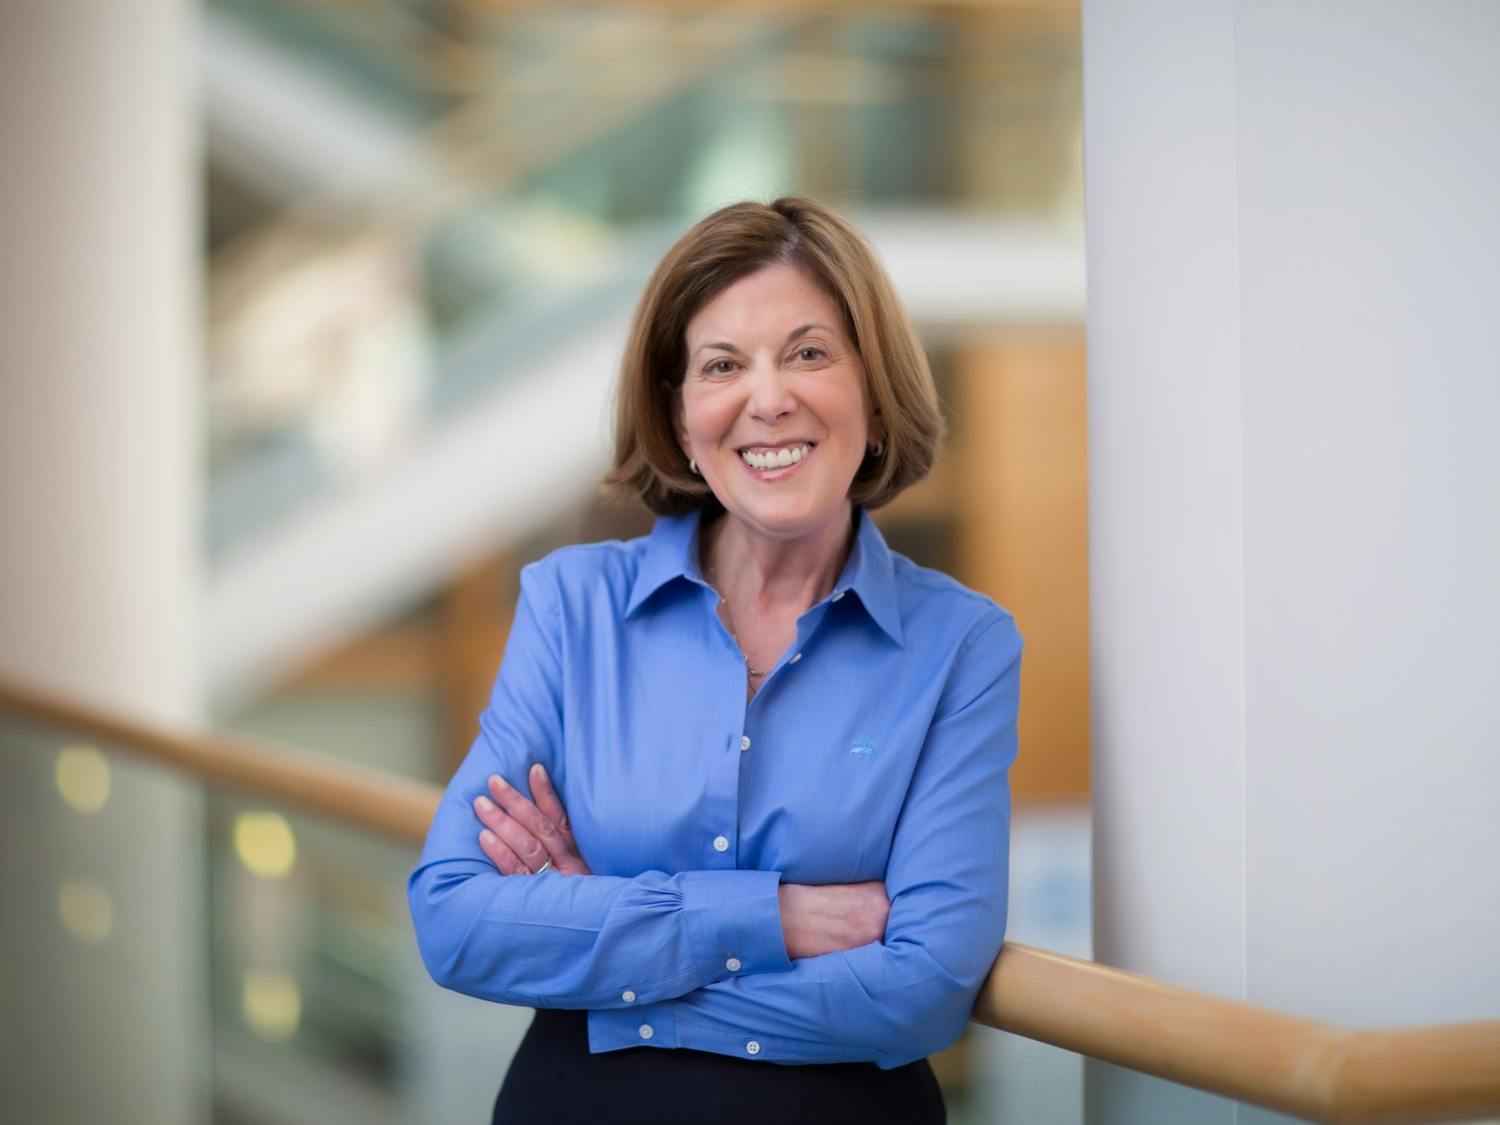 Dr. Barbara K. Rimer will conclude her service as dean of the Gillings School on June 30, 2022. Photo courtesy of Gillings School of Global Public Health.